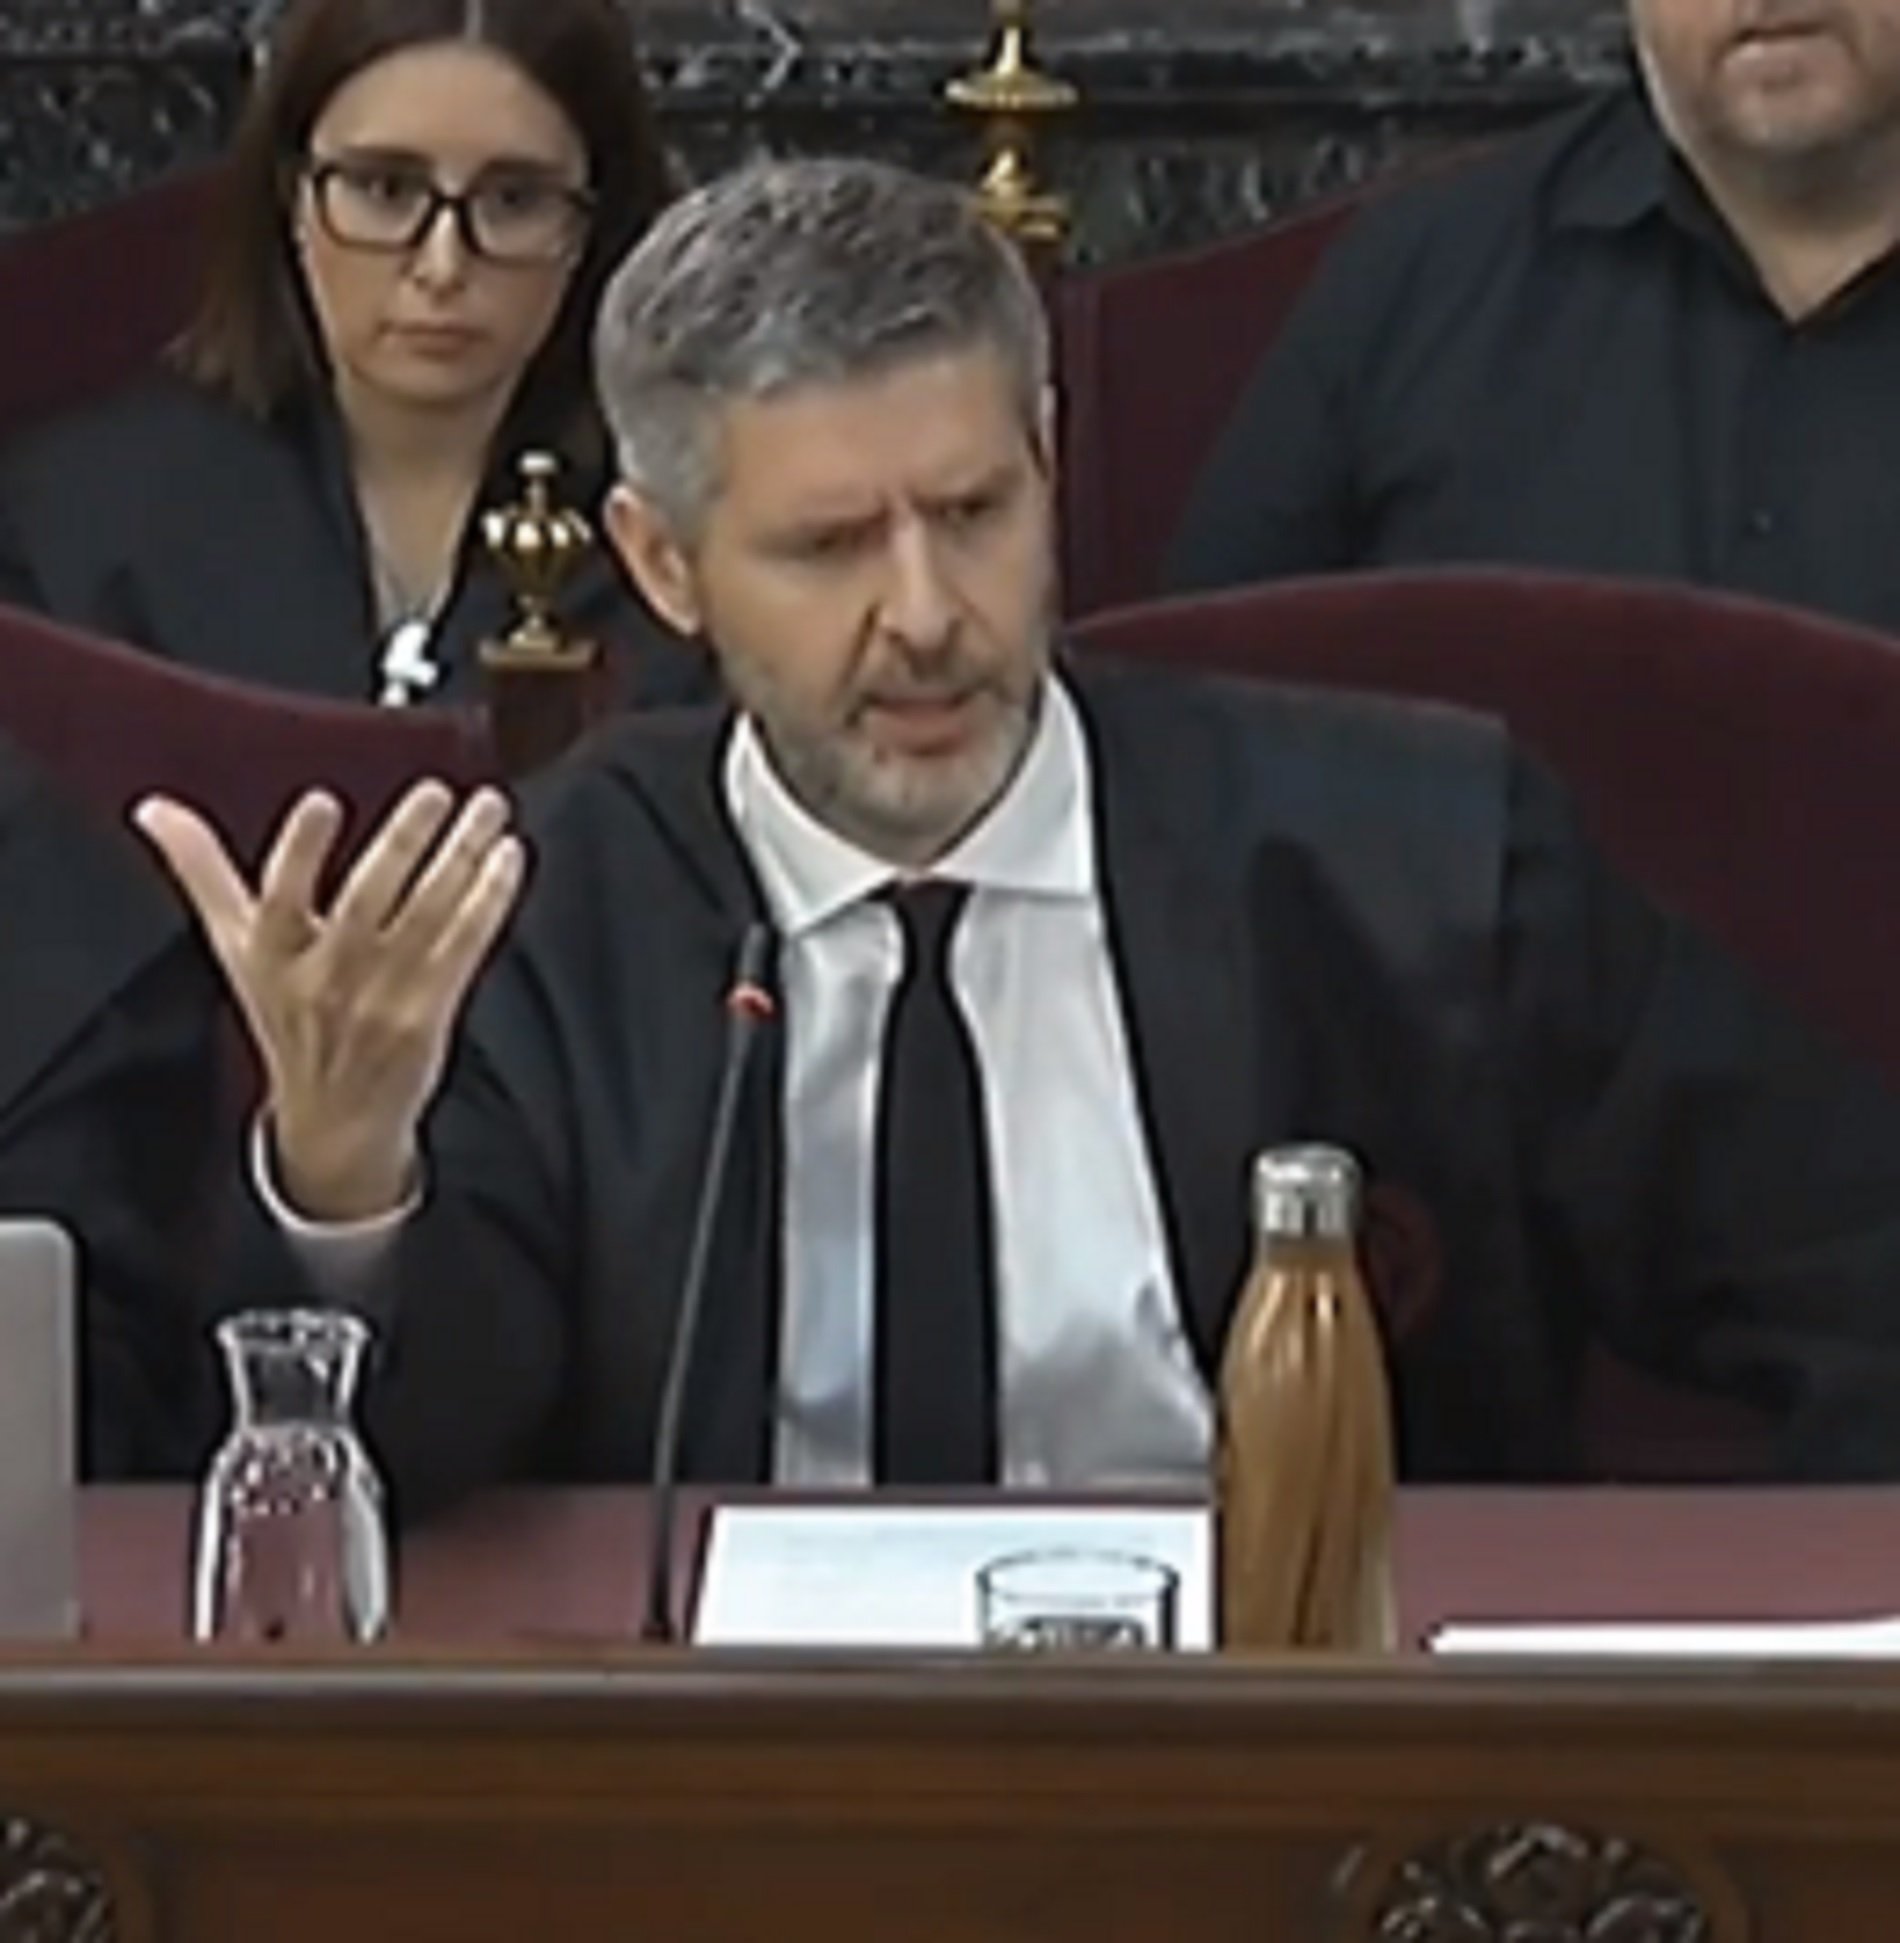 Catalan trial lawyer Van den Eynde: "An ideology is being persecuted"